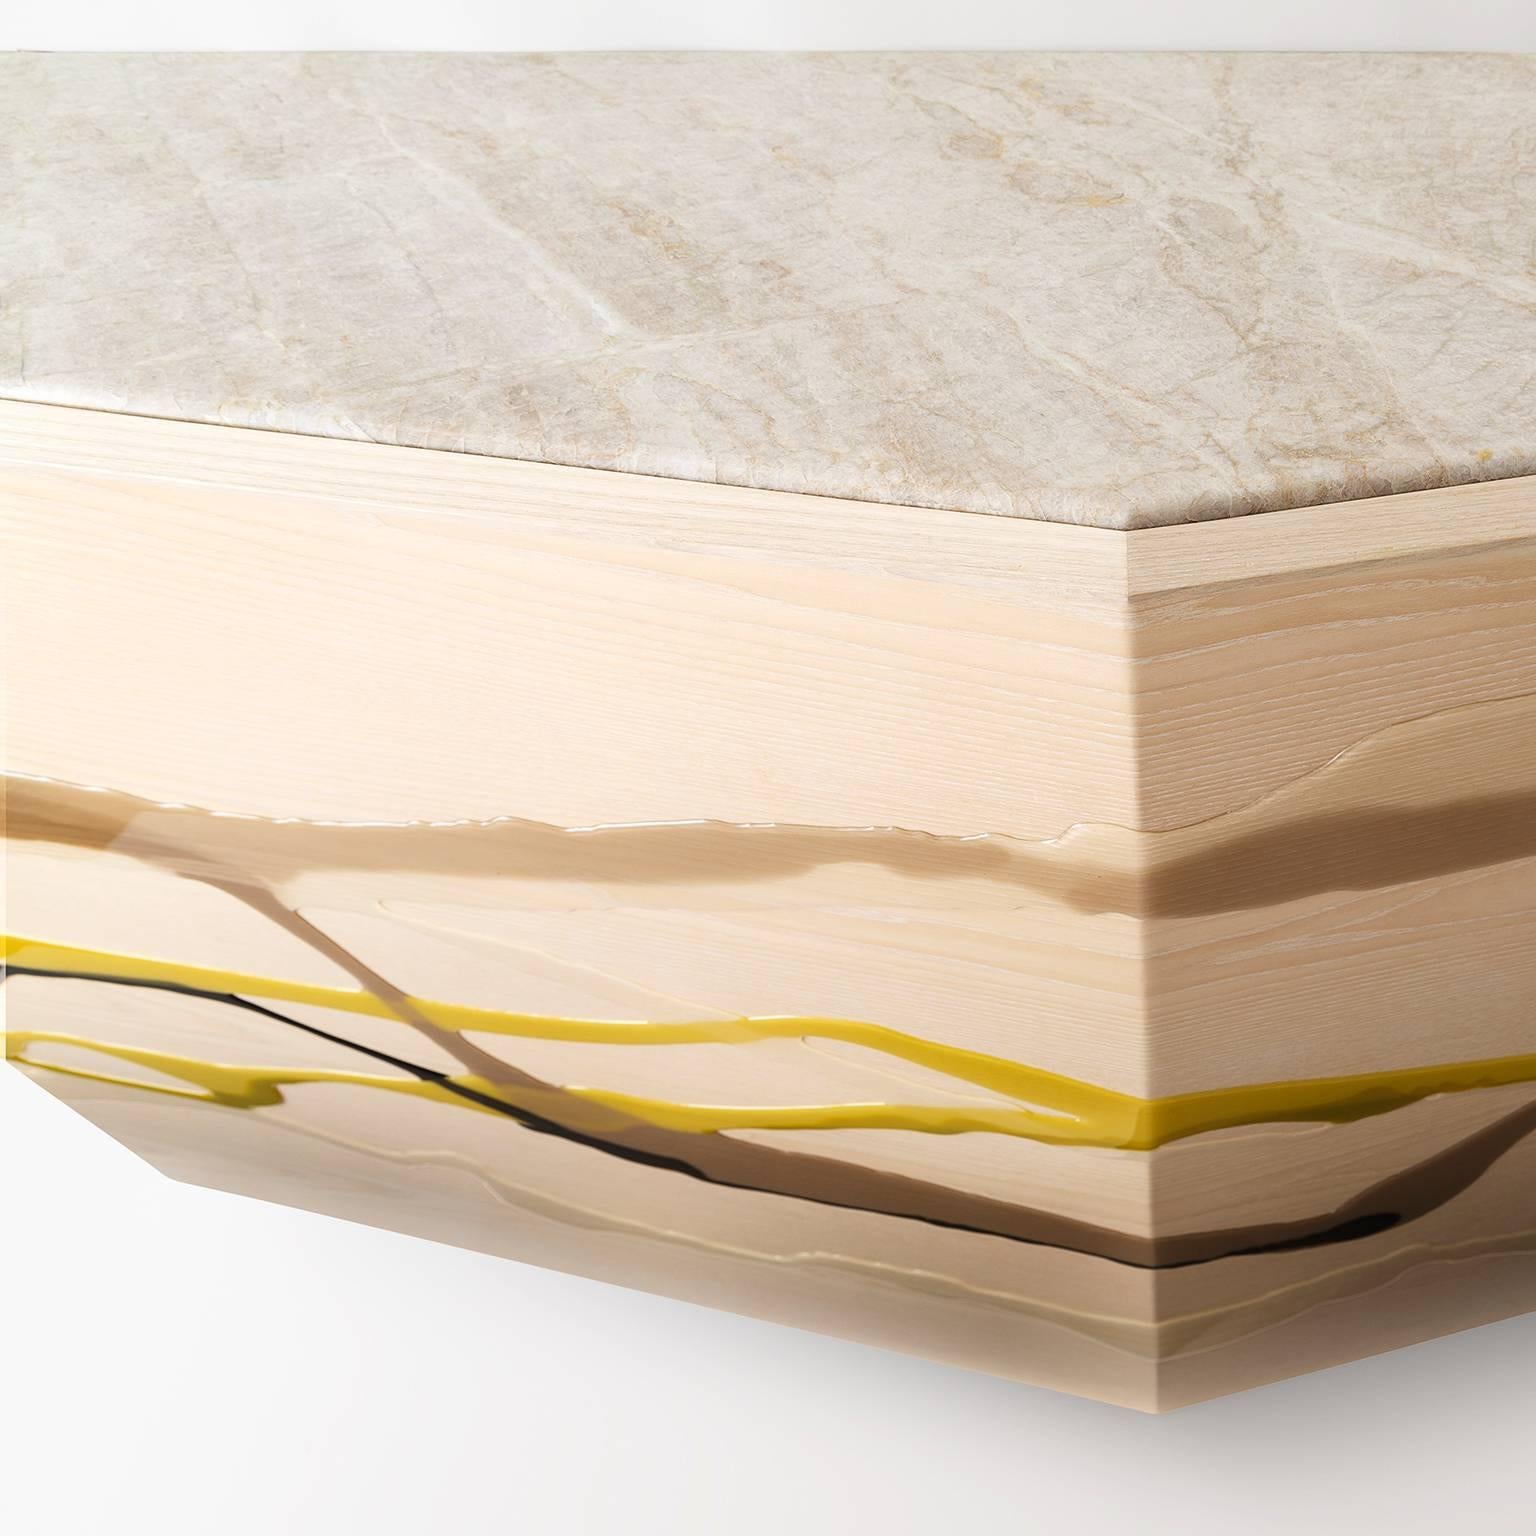 Organic Modern Drip/Fold Console Table with Resin and Quartzite Stone Top - IN STOCK For Sale